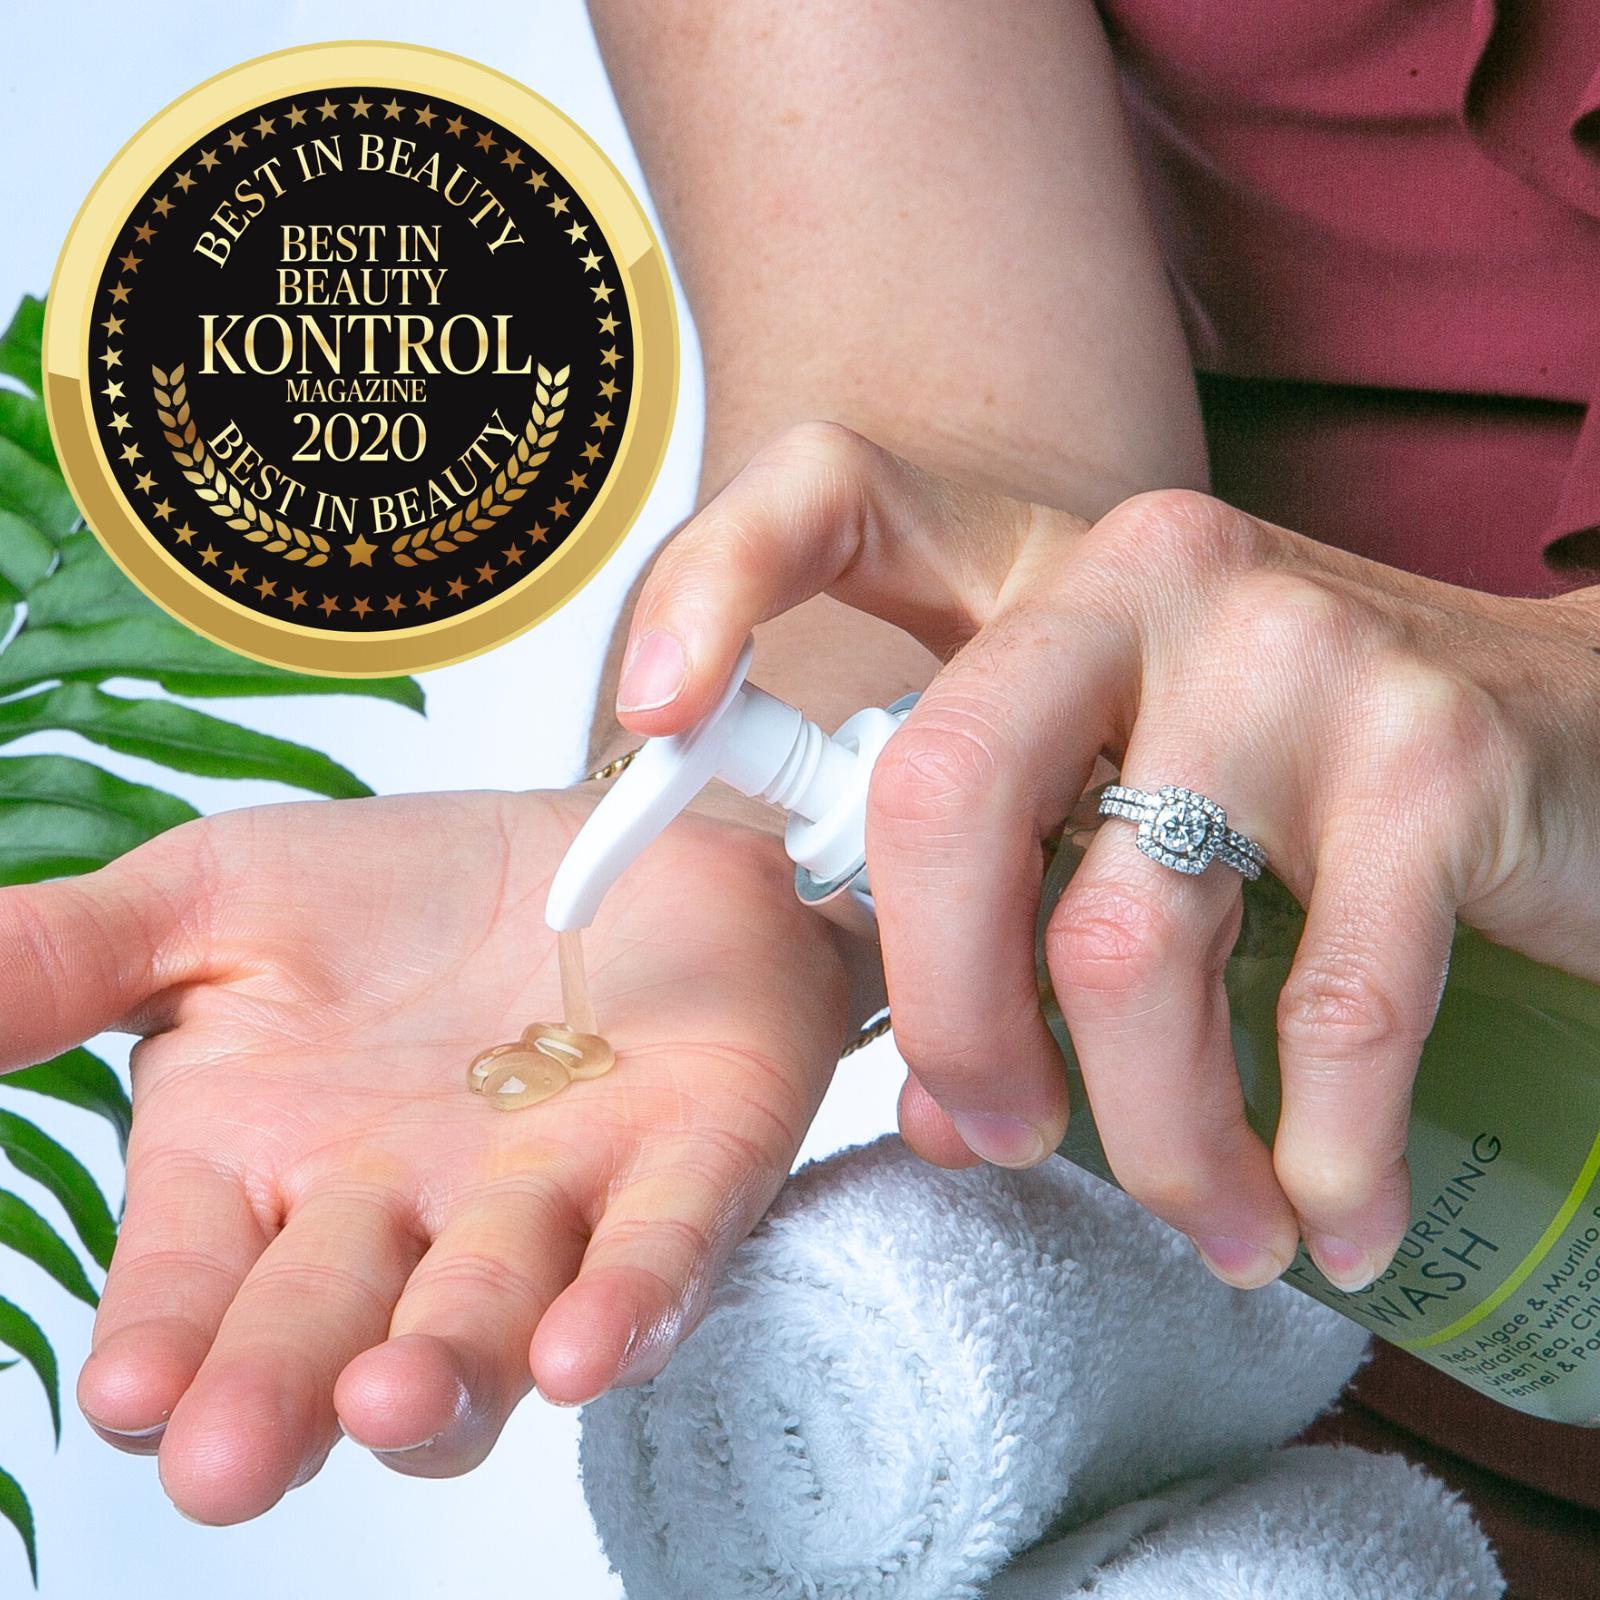 A photo of the MOISTURIZING WASH being pumped into the palm of someone's hand. A badge over the image says "Best in Beauty: Kontrol Magazine 2020".